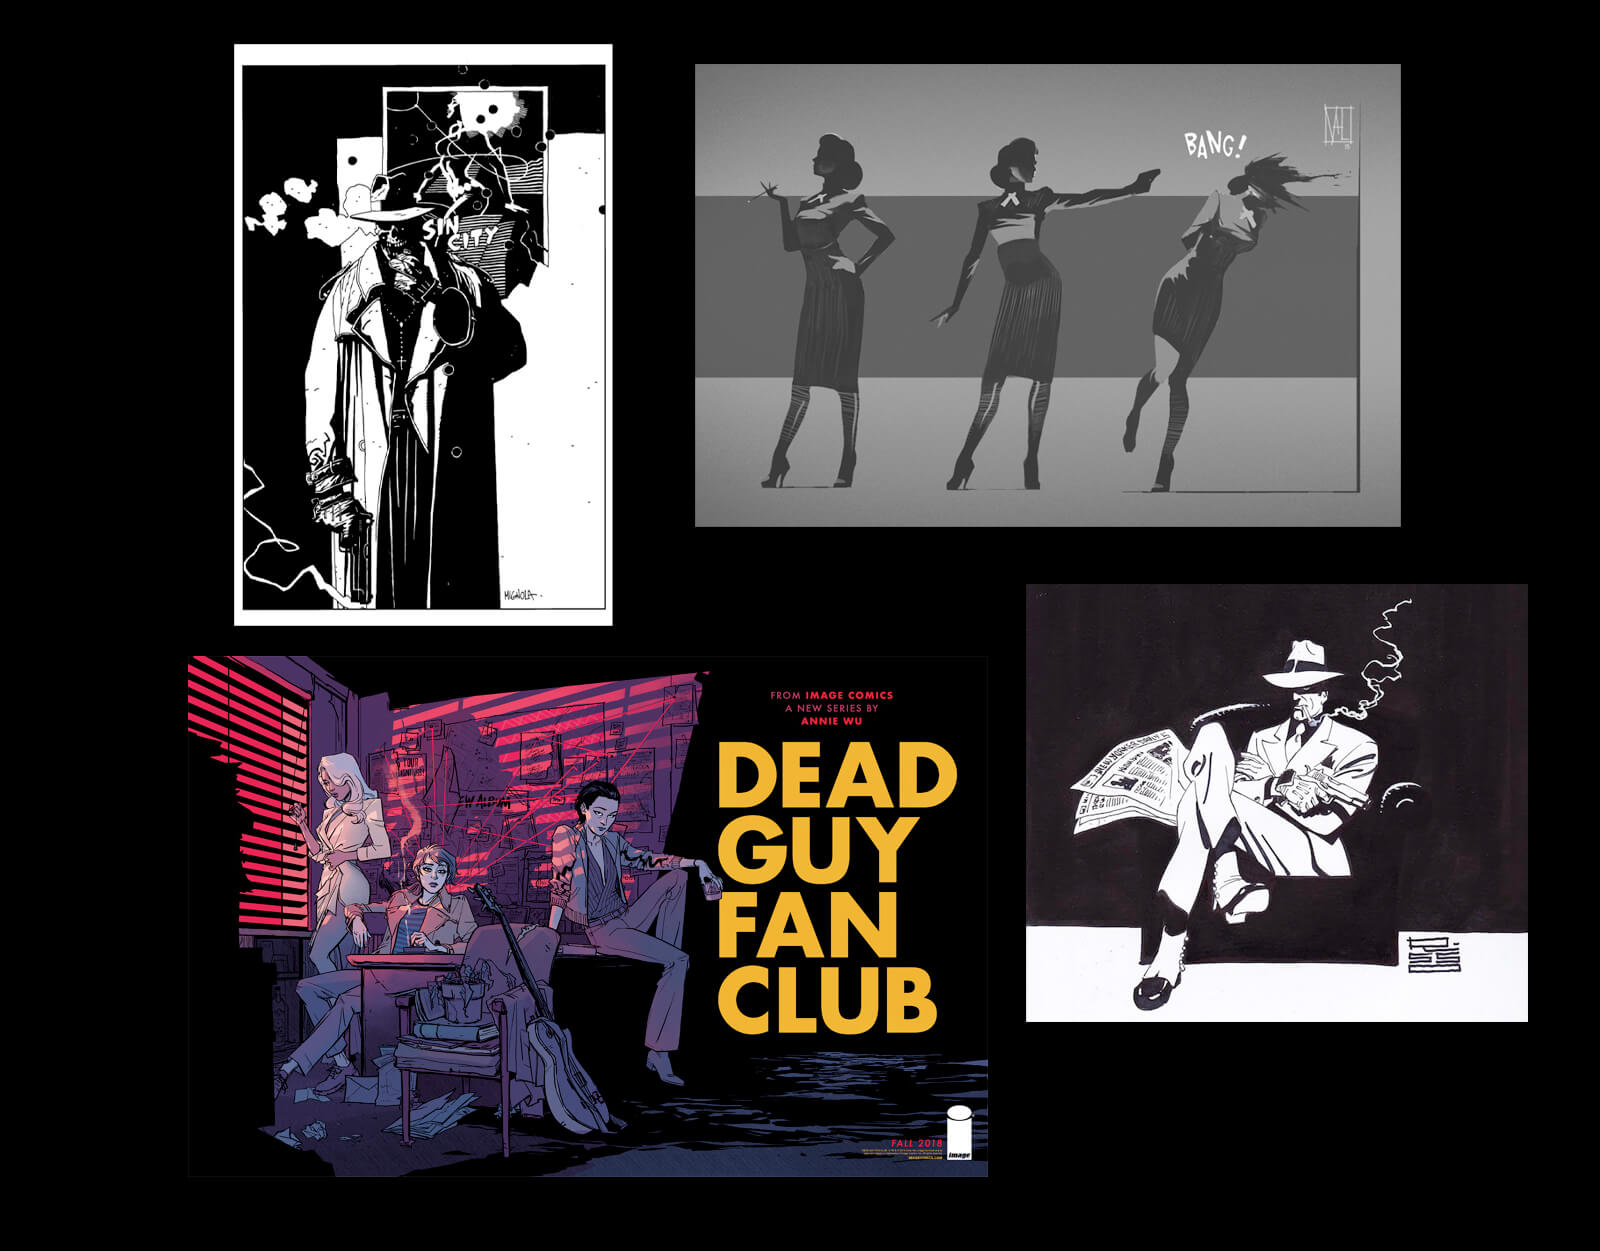 Comic illustrations that have strong shadows, smoking characters, and otherwise depict common noir themes.